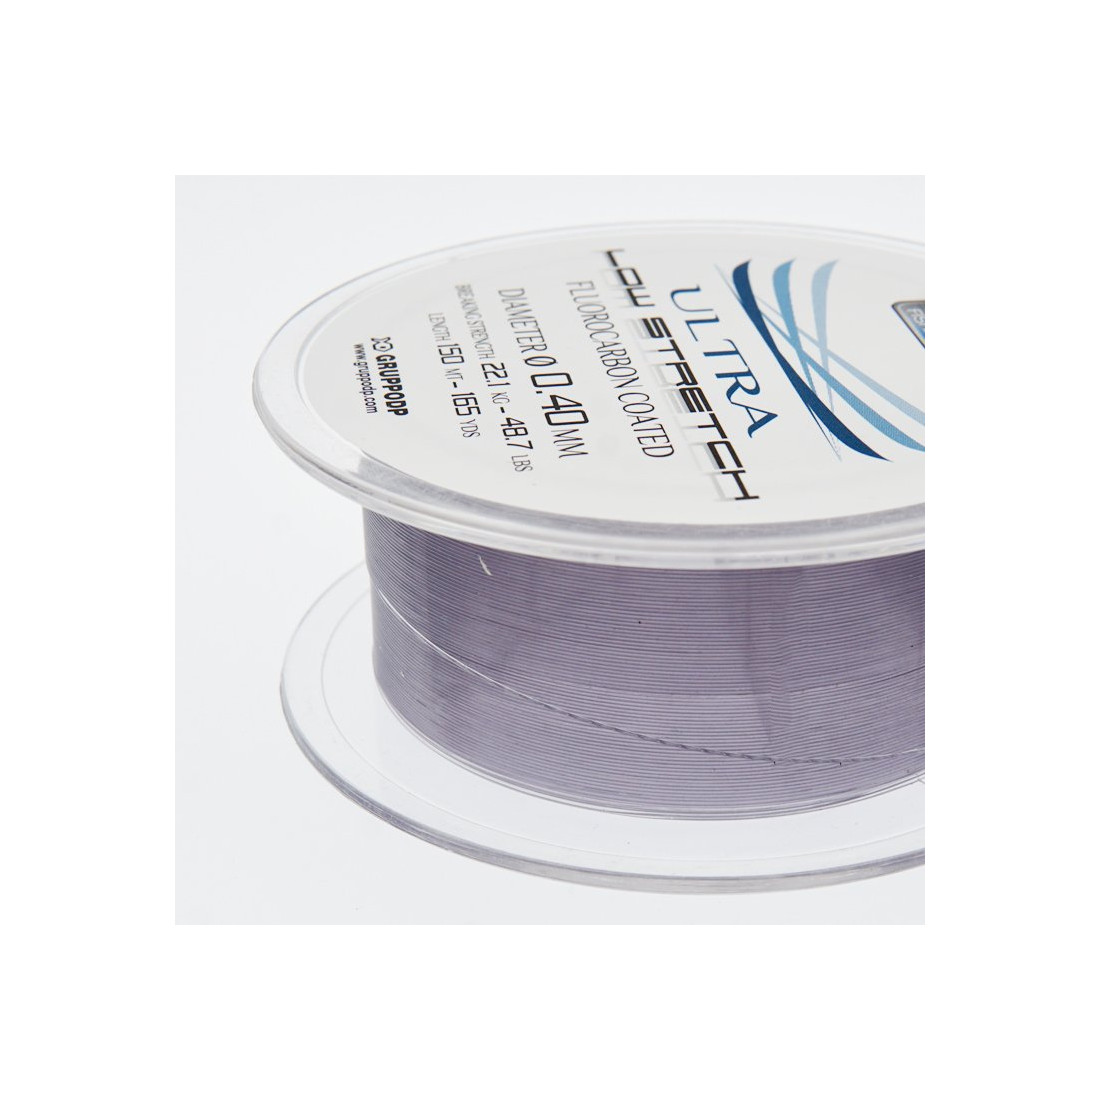 ASSO Ultra Low Stretch Fluorocarbon Coated Fishing Line 